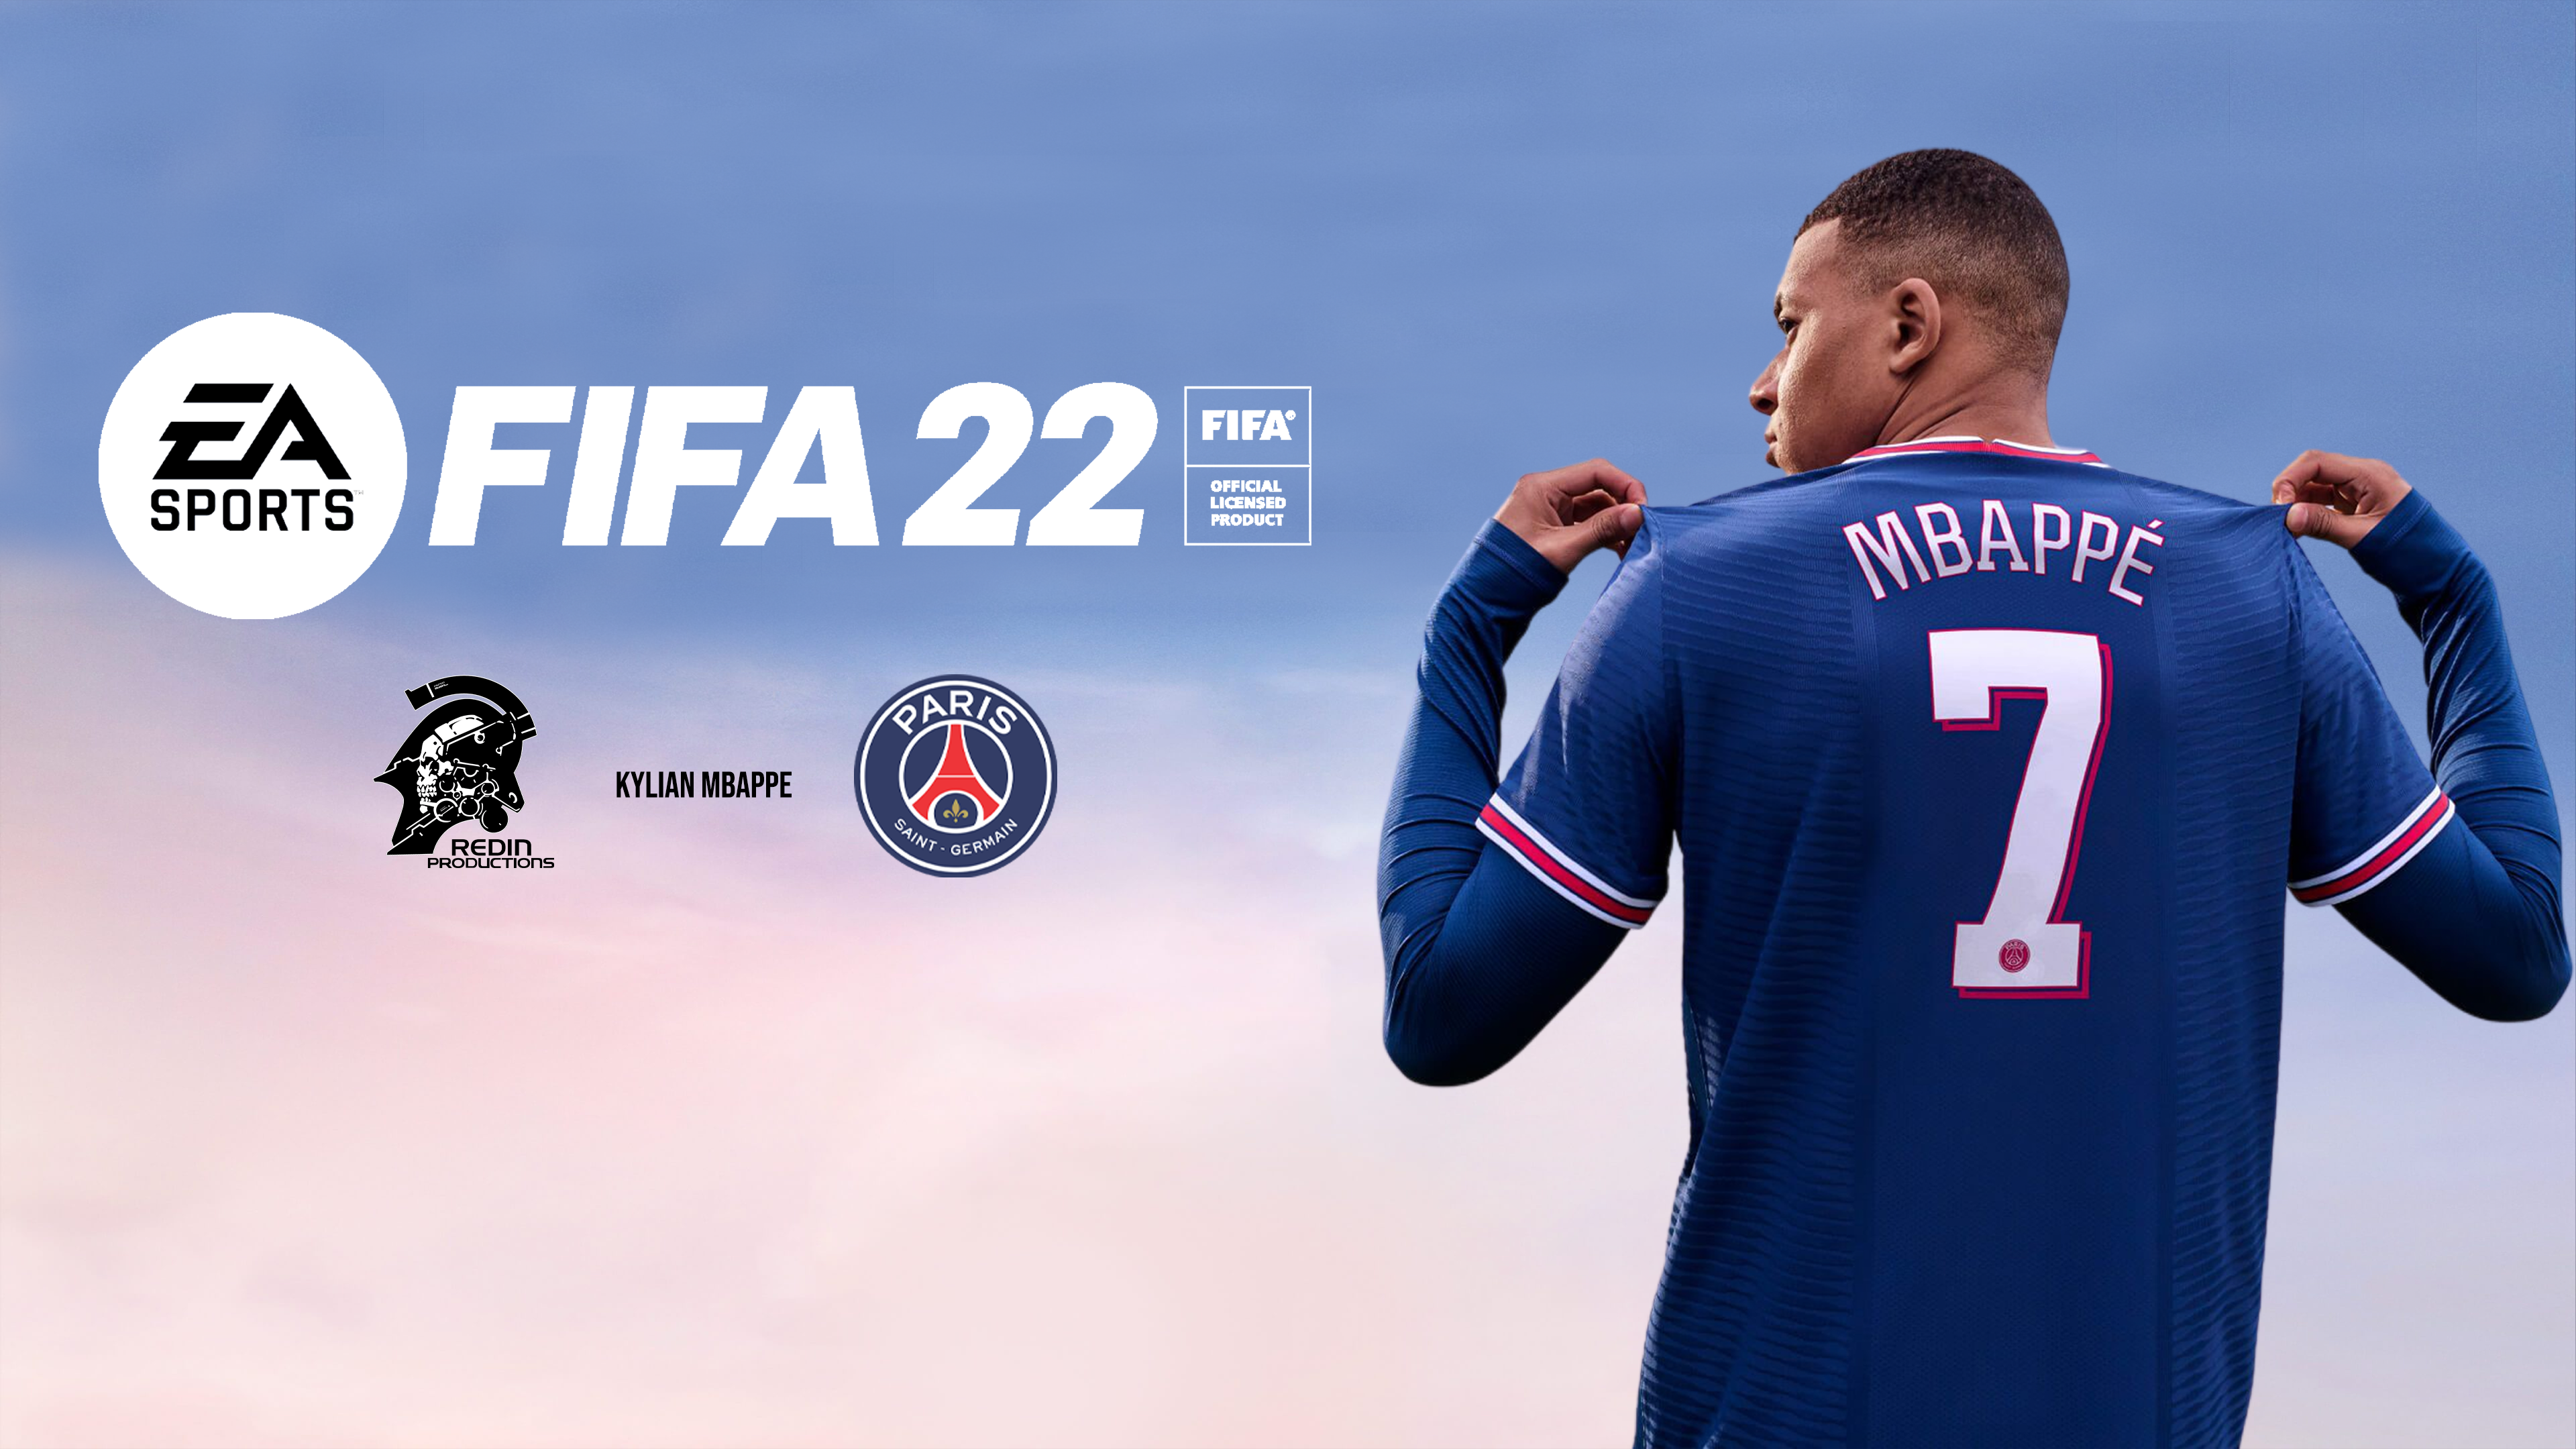 FIFA 22 4k Ultra HD Wallpaper by redinproductions